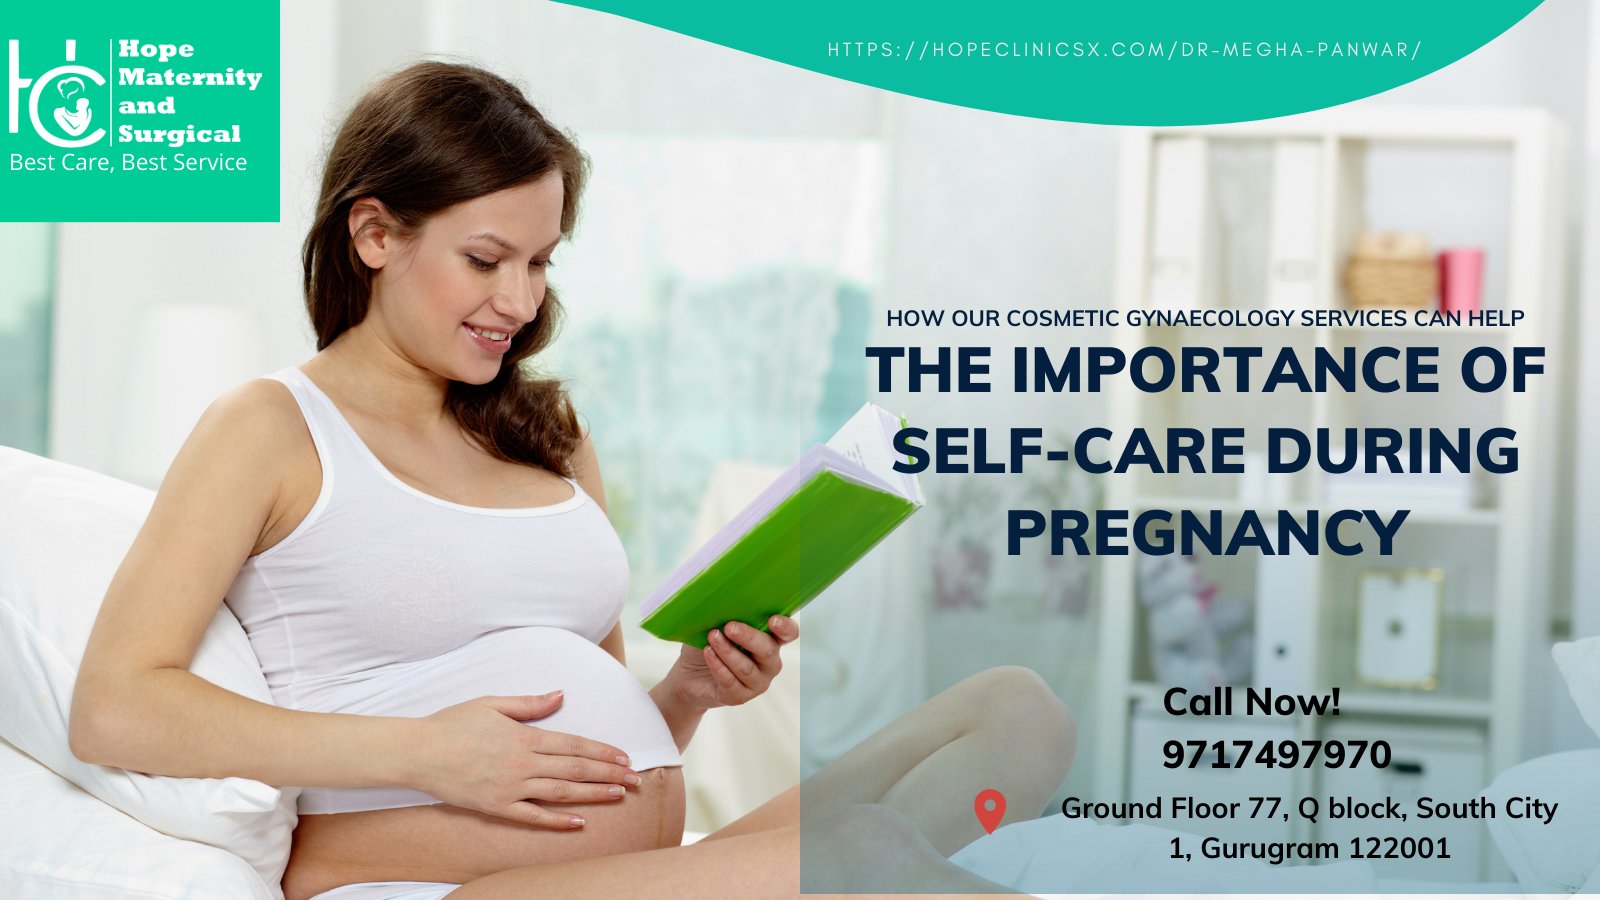 Hope Clinic Gurgaon on X: Looking for the best gynecologist in Gurgaon?  Look no further than Hope Clinic, led by Dr. Megha Panwar, a highly skilled  and experienced gynecologist. Book your appointment